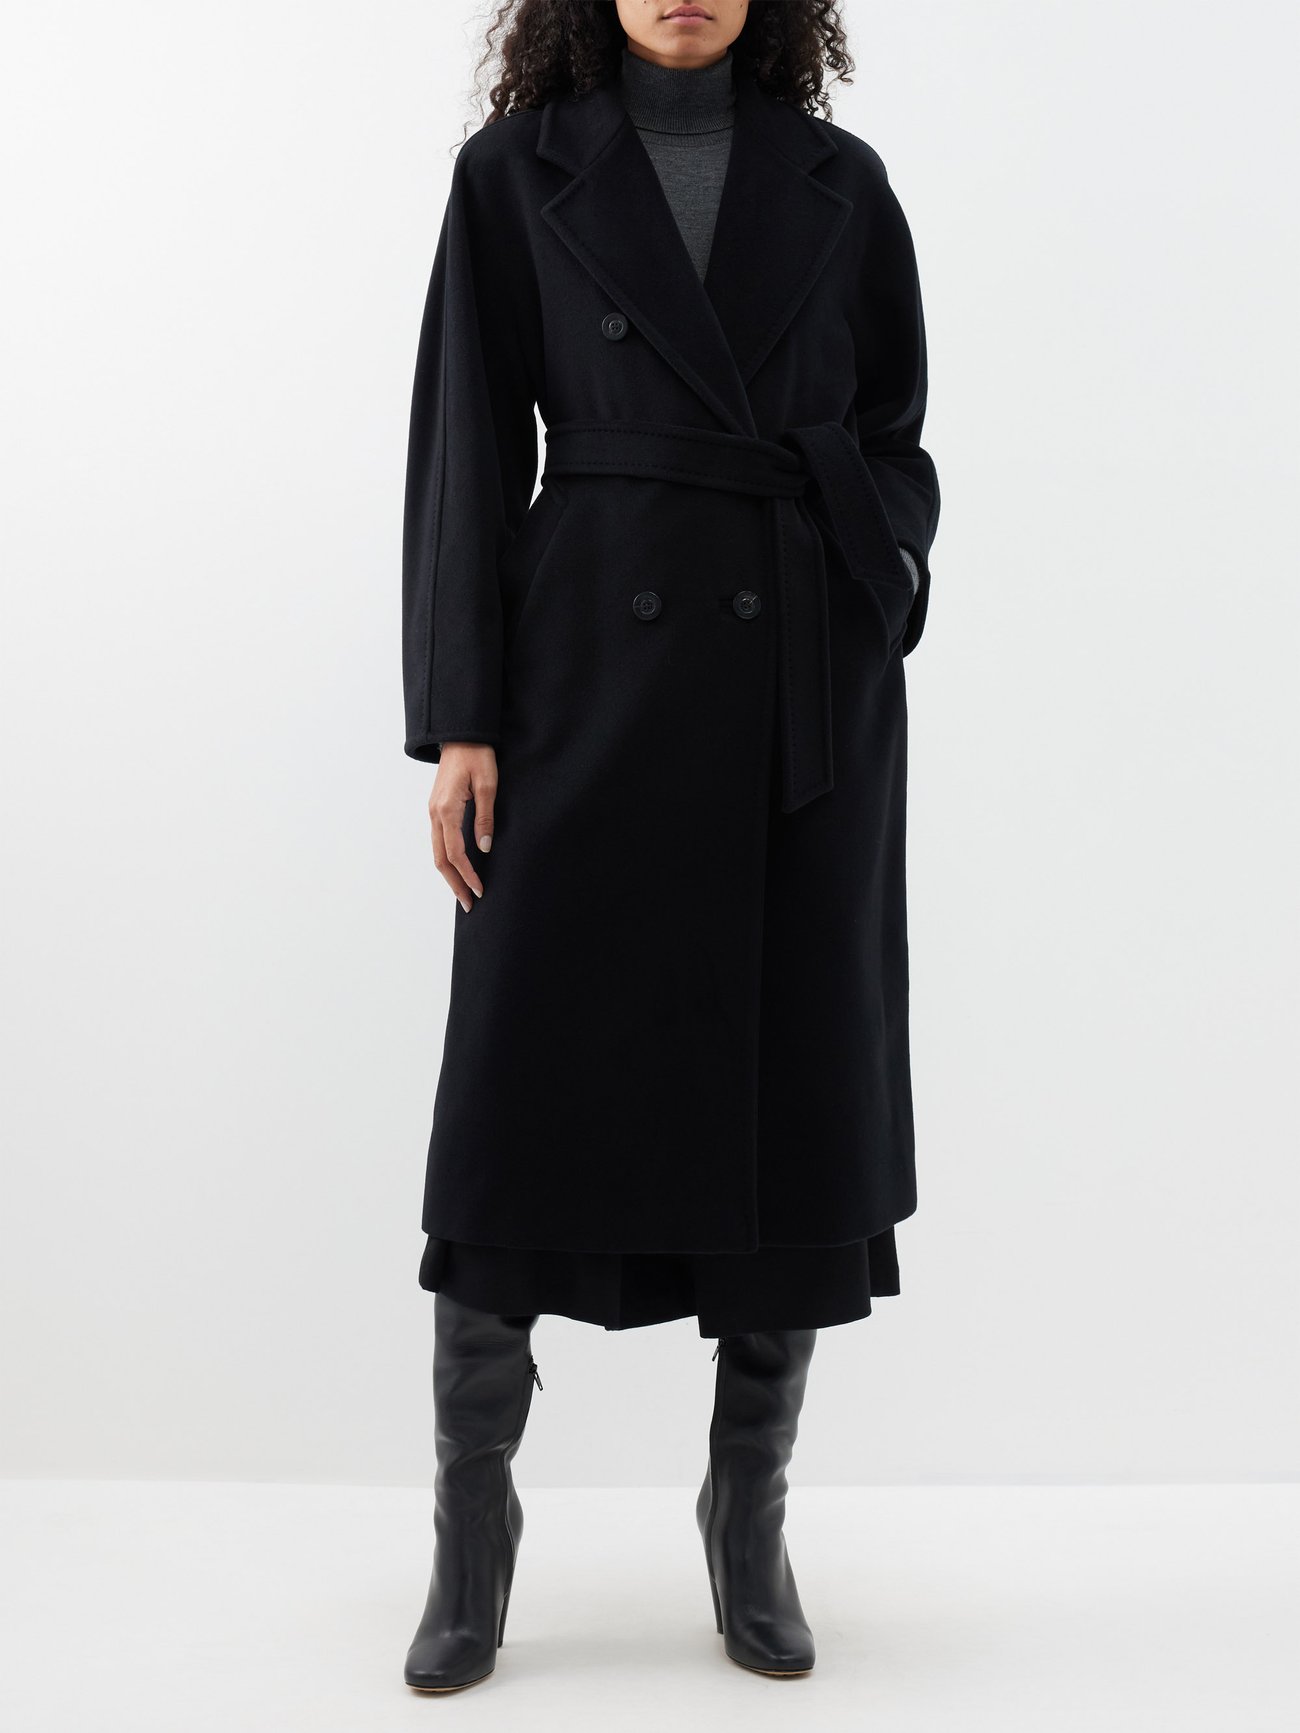 The Best Max Mara Coats That Are So Timeless | Who What Wear UK